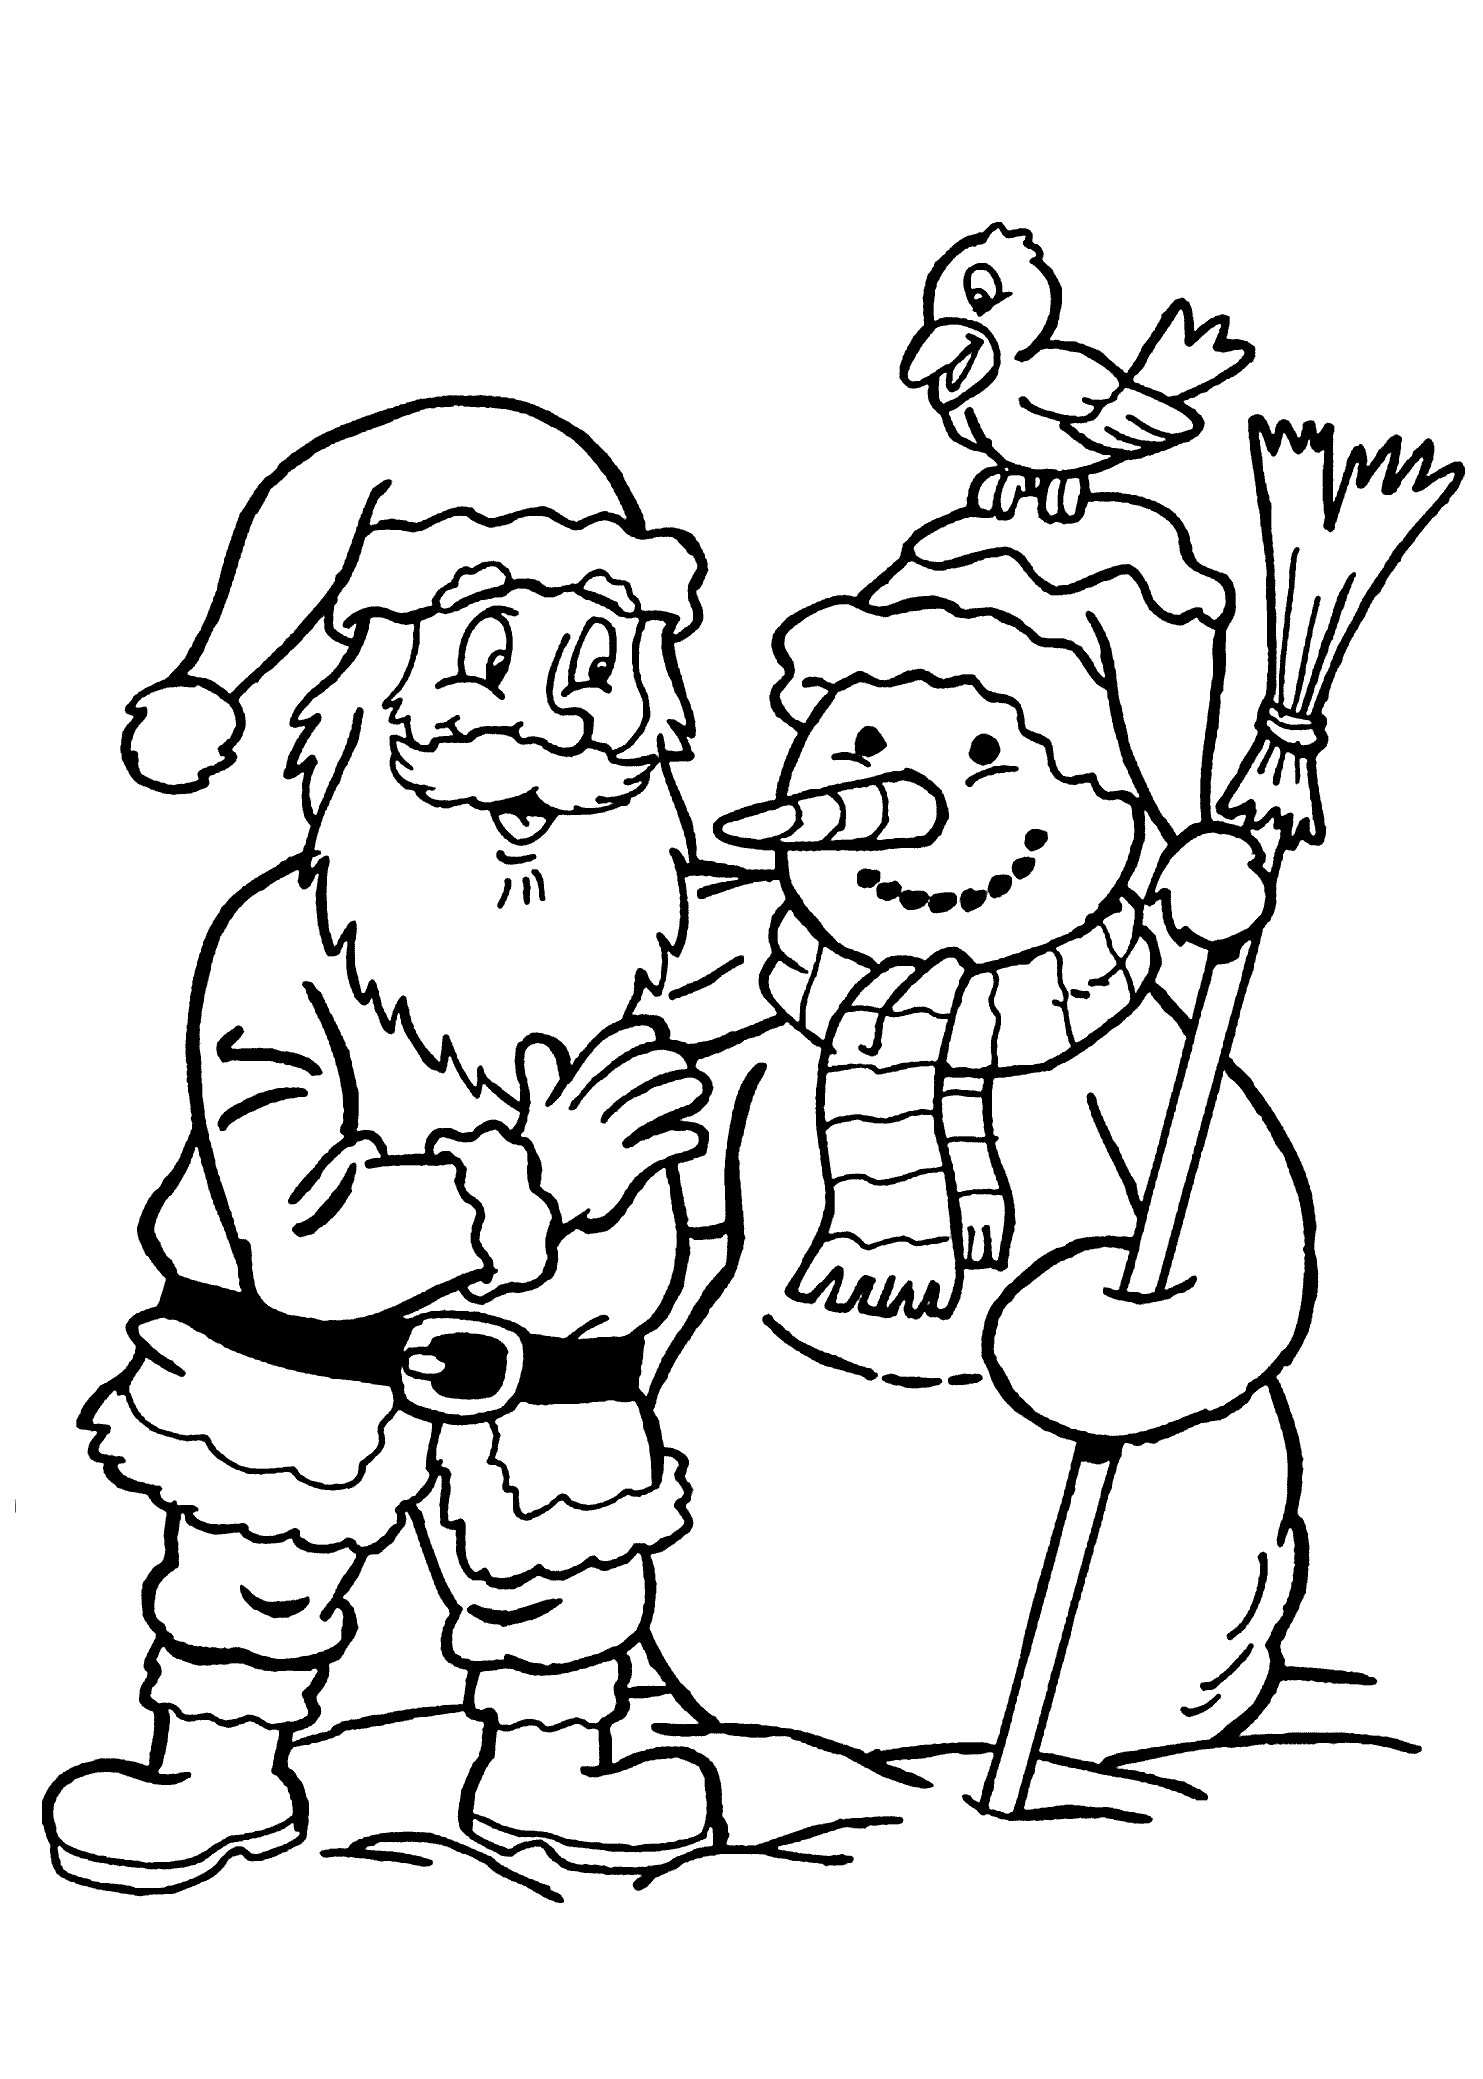 Santa Coloring Pages Free Coloring Ideas Santa Claus And Snowman Coloring Pages For